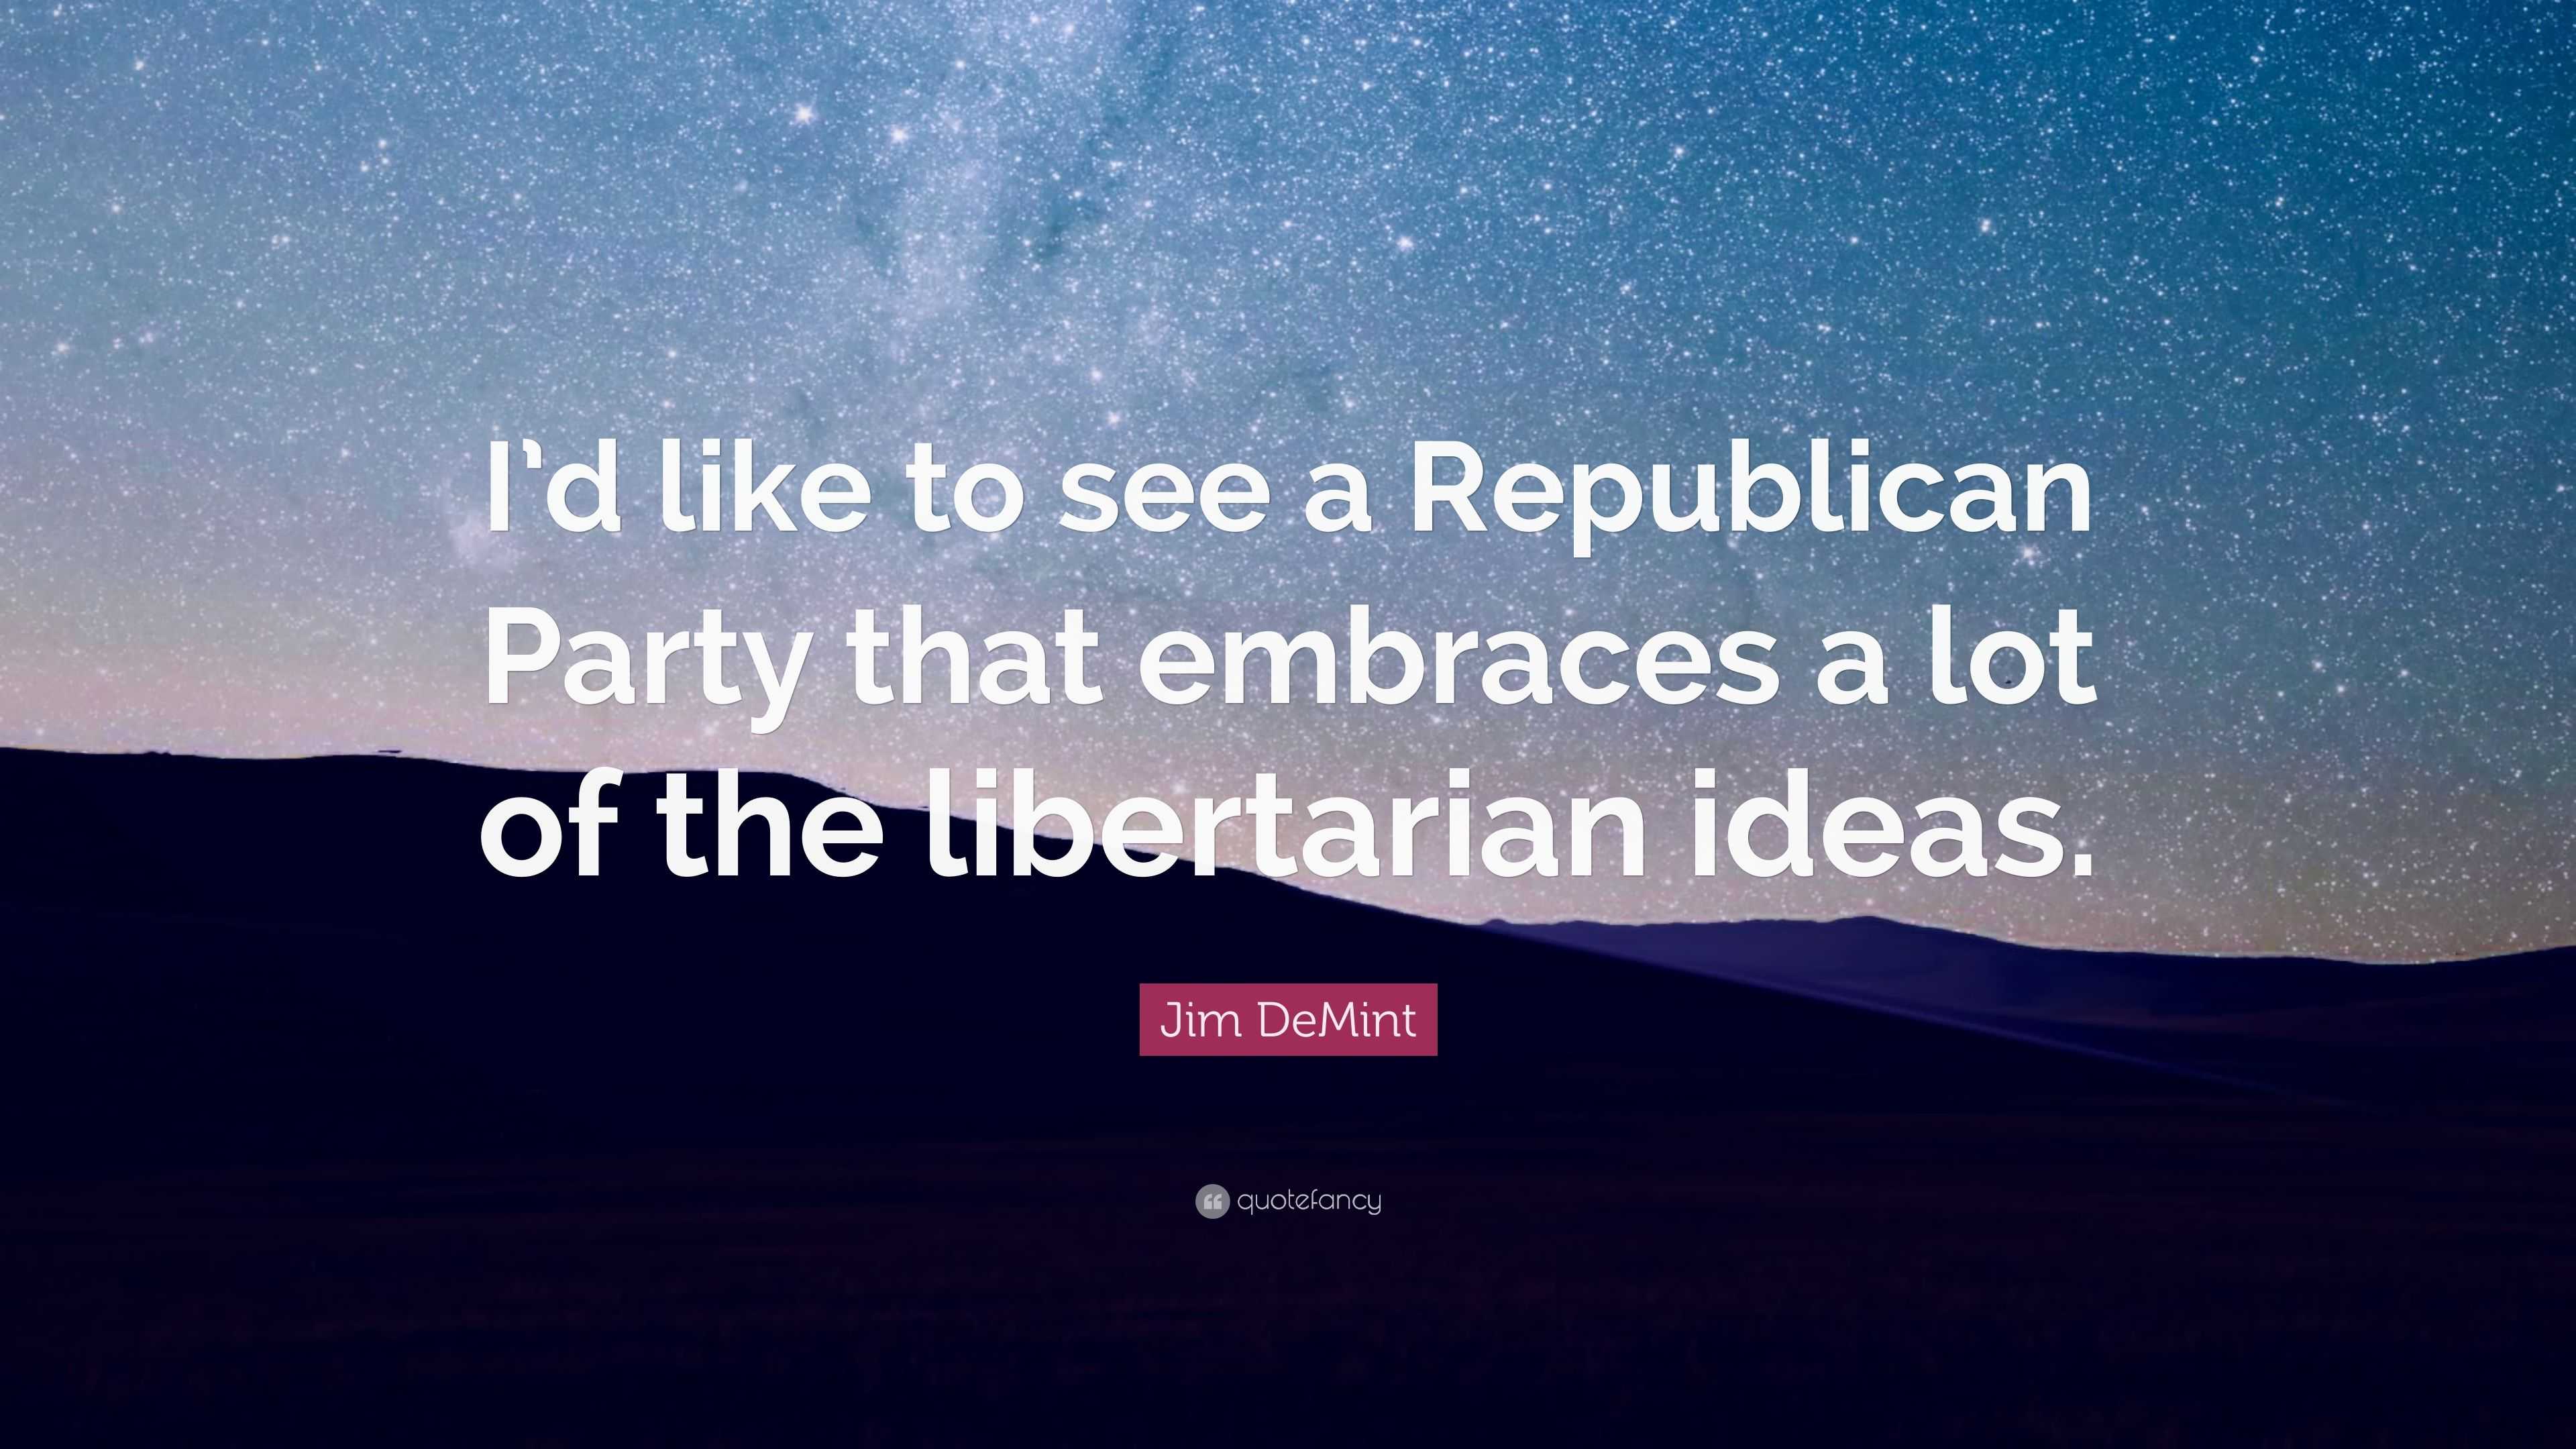 Jim Demint Quote “id Like To See A Republican Party That Embraces A Lot Of The Libertarian Ideas” 8160